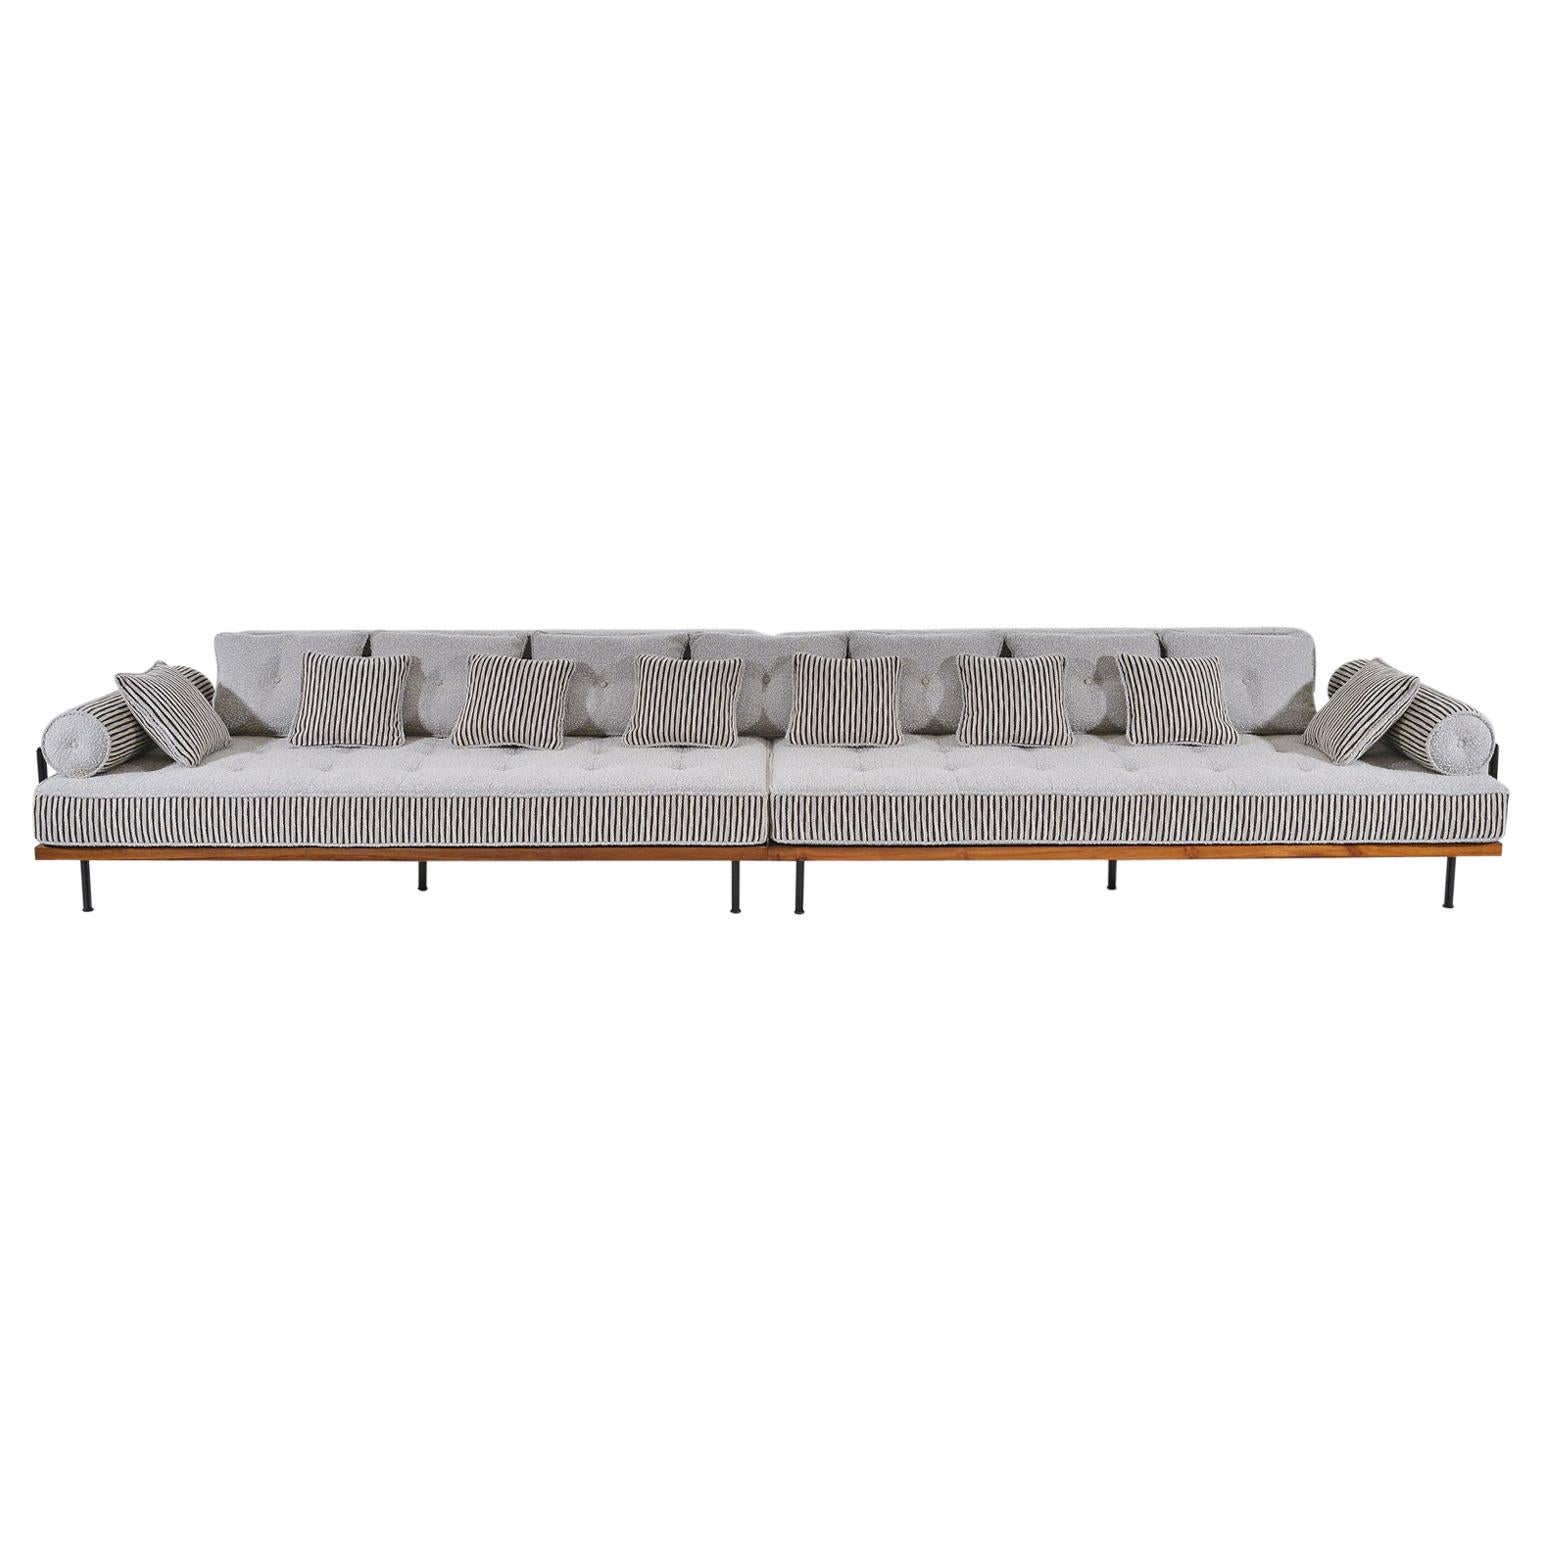 Set of 2 Bespoke Sofas with Brass and Reclaimed Hardwood Frame by P. Tendercool For Sale